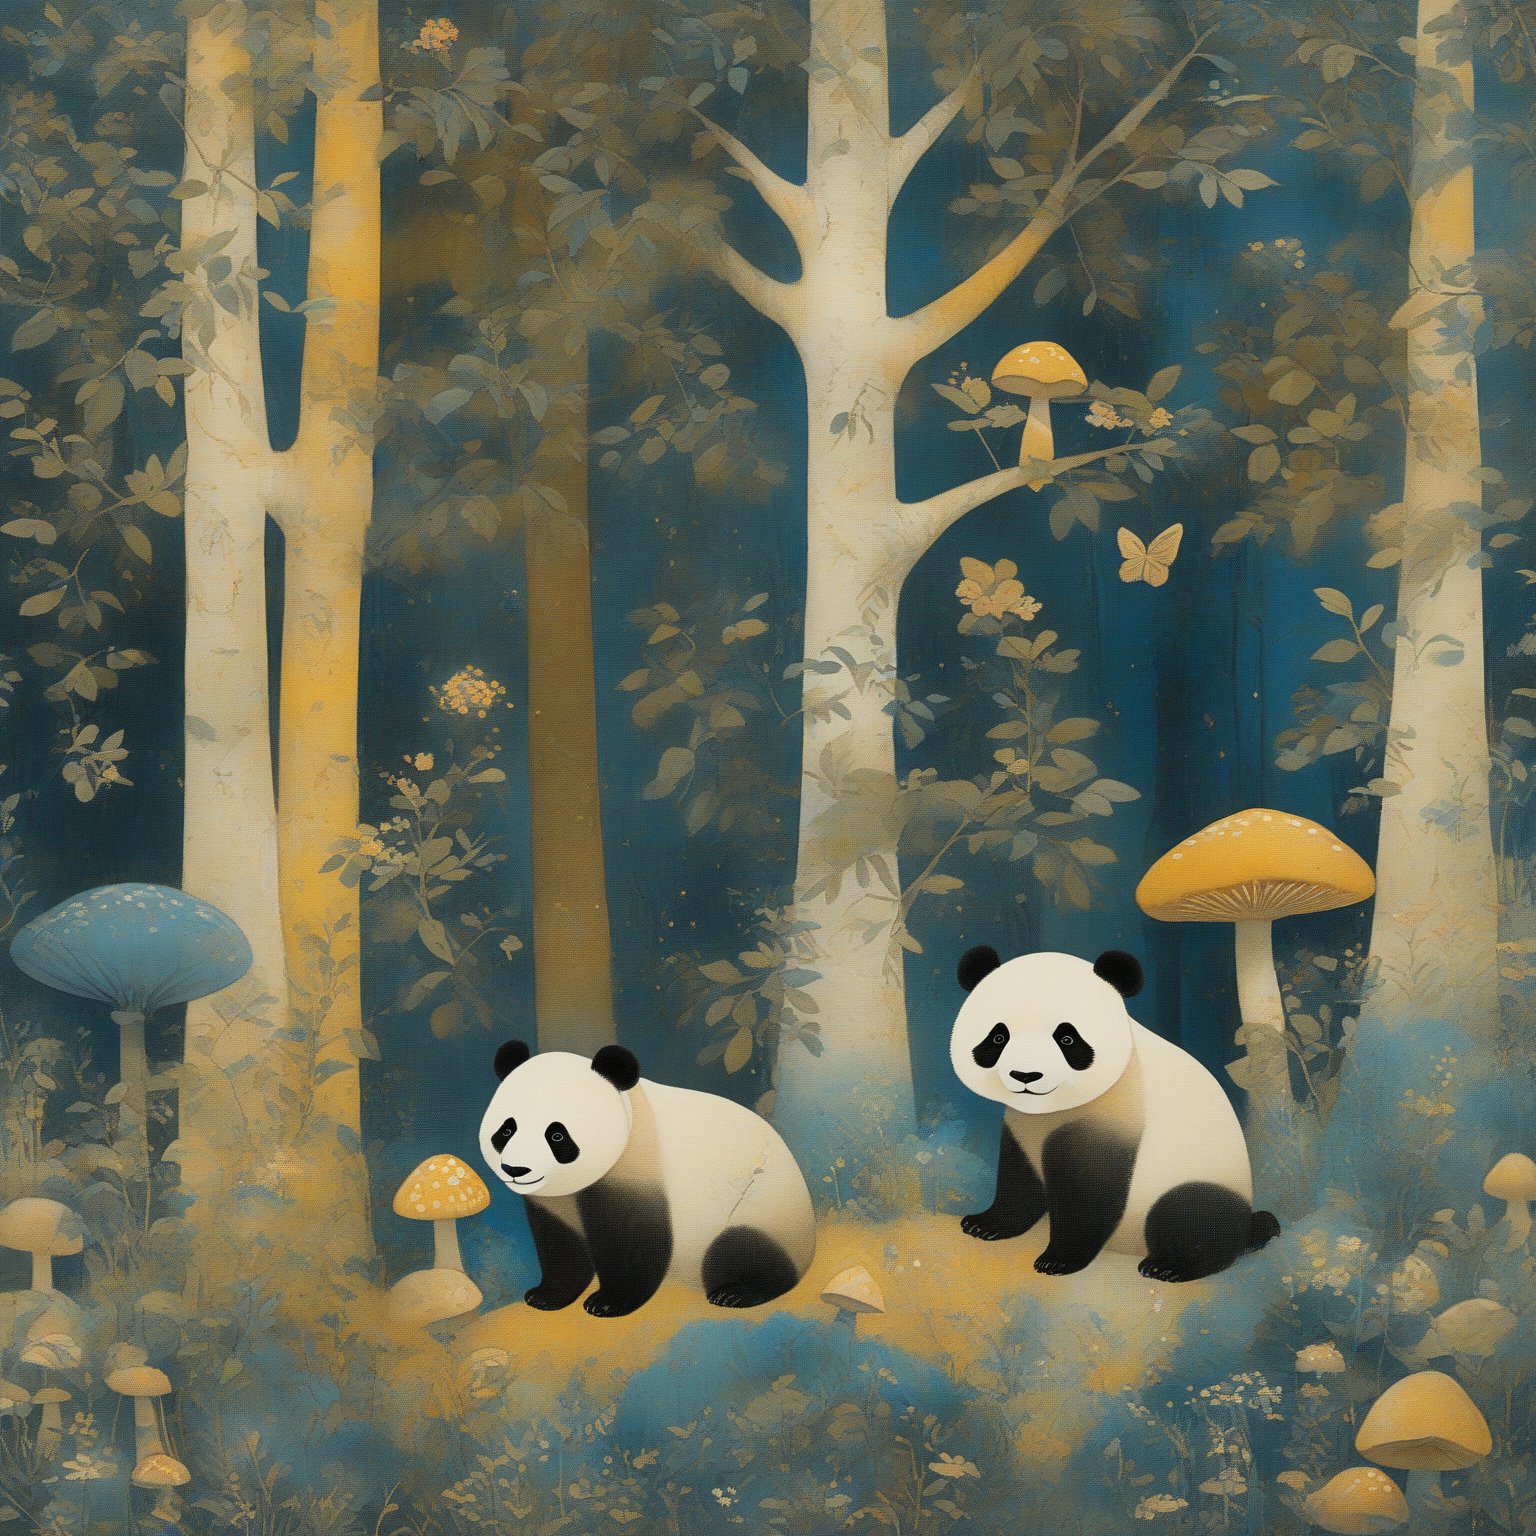 A whimsical forest scene dominated by pandas. There are three pandas in total, with one sitting on the ground, one standing, and one peeking from a tree. The forest is filled with various elements like trees, mushrooms, flowers, and small creatures. The color palette is predominantly soft, with shades of blue, yellow, and beige. The overall ambiance is playful and serene, evoking a sense of calm and wonder.